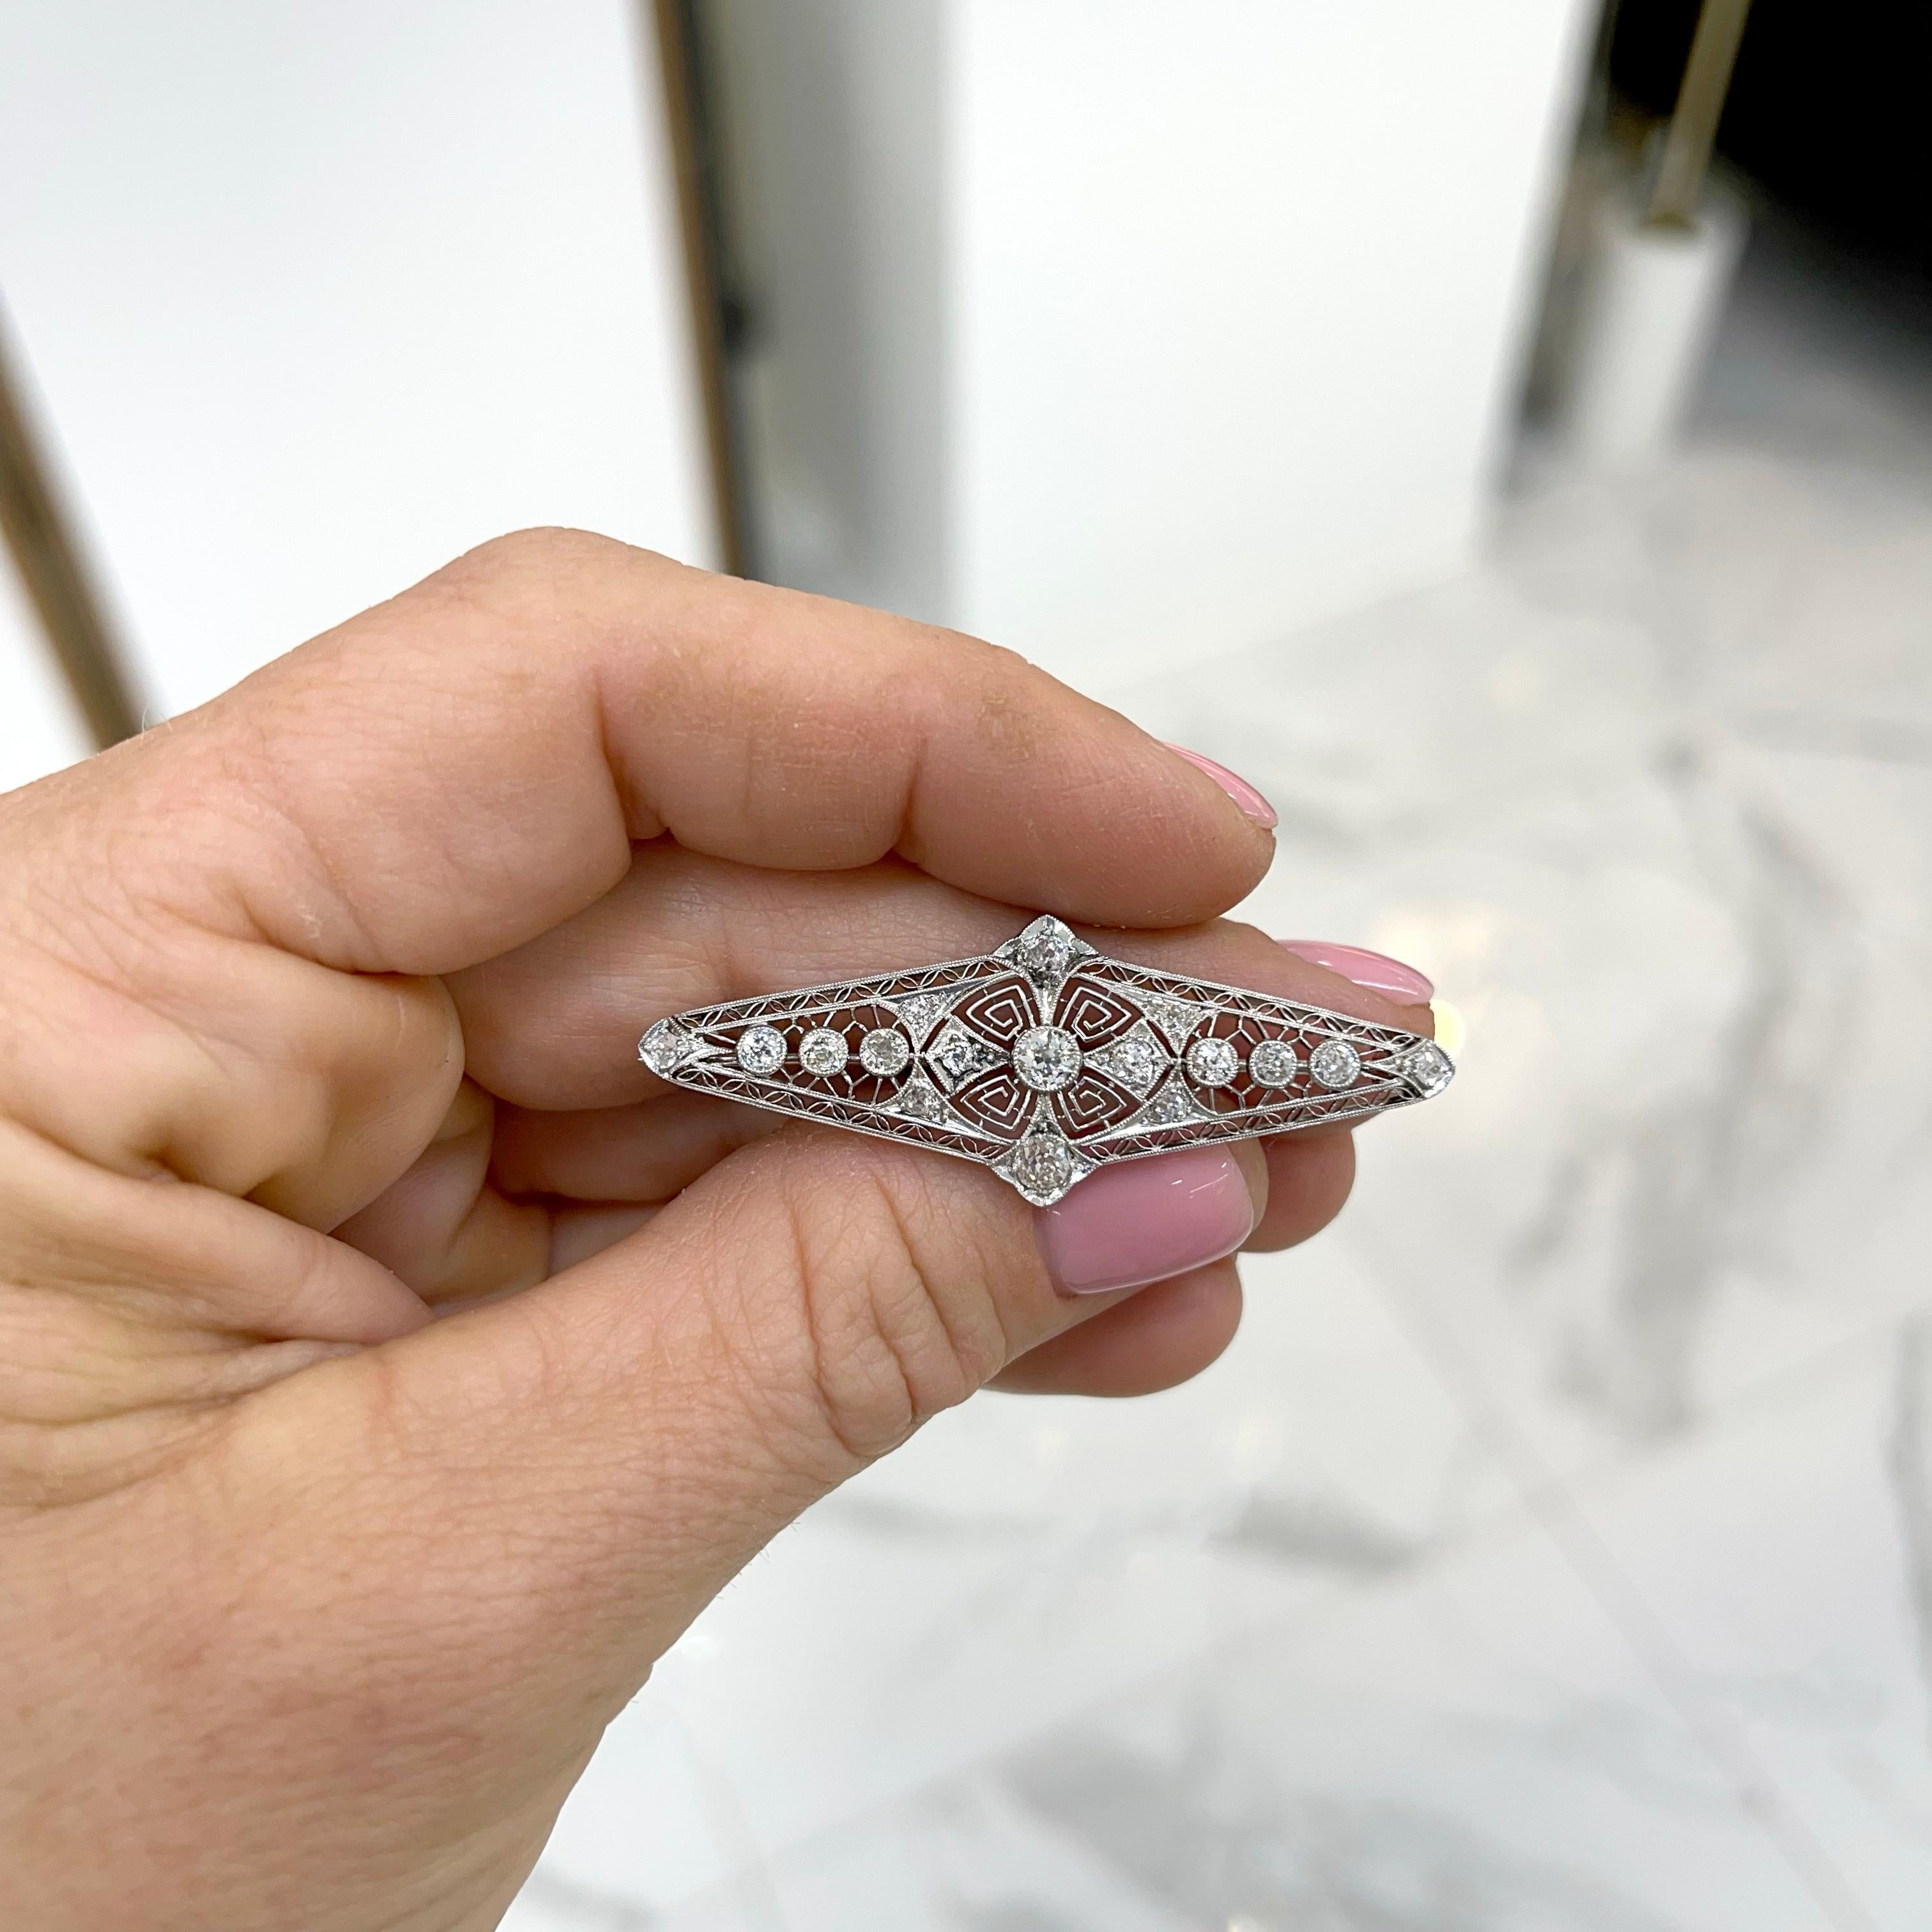 Antique Art Deco Platinum Old Cuts Diamonds Filigree Brooch In Excellent Condition For Sale In Houston, TX